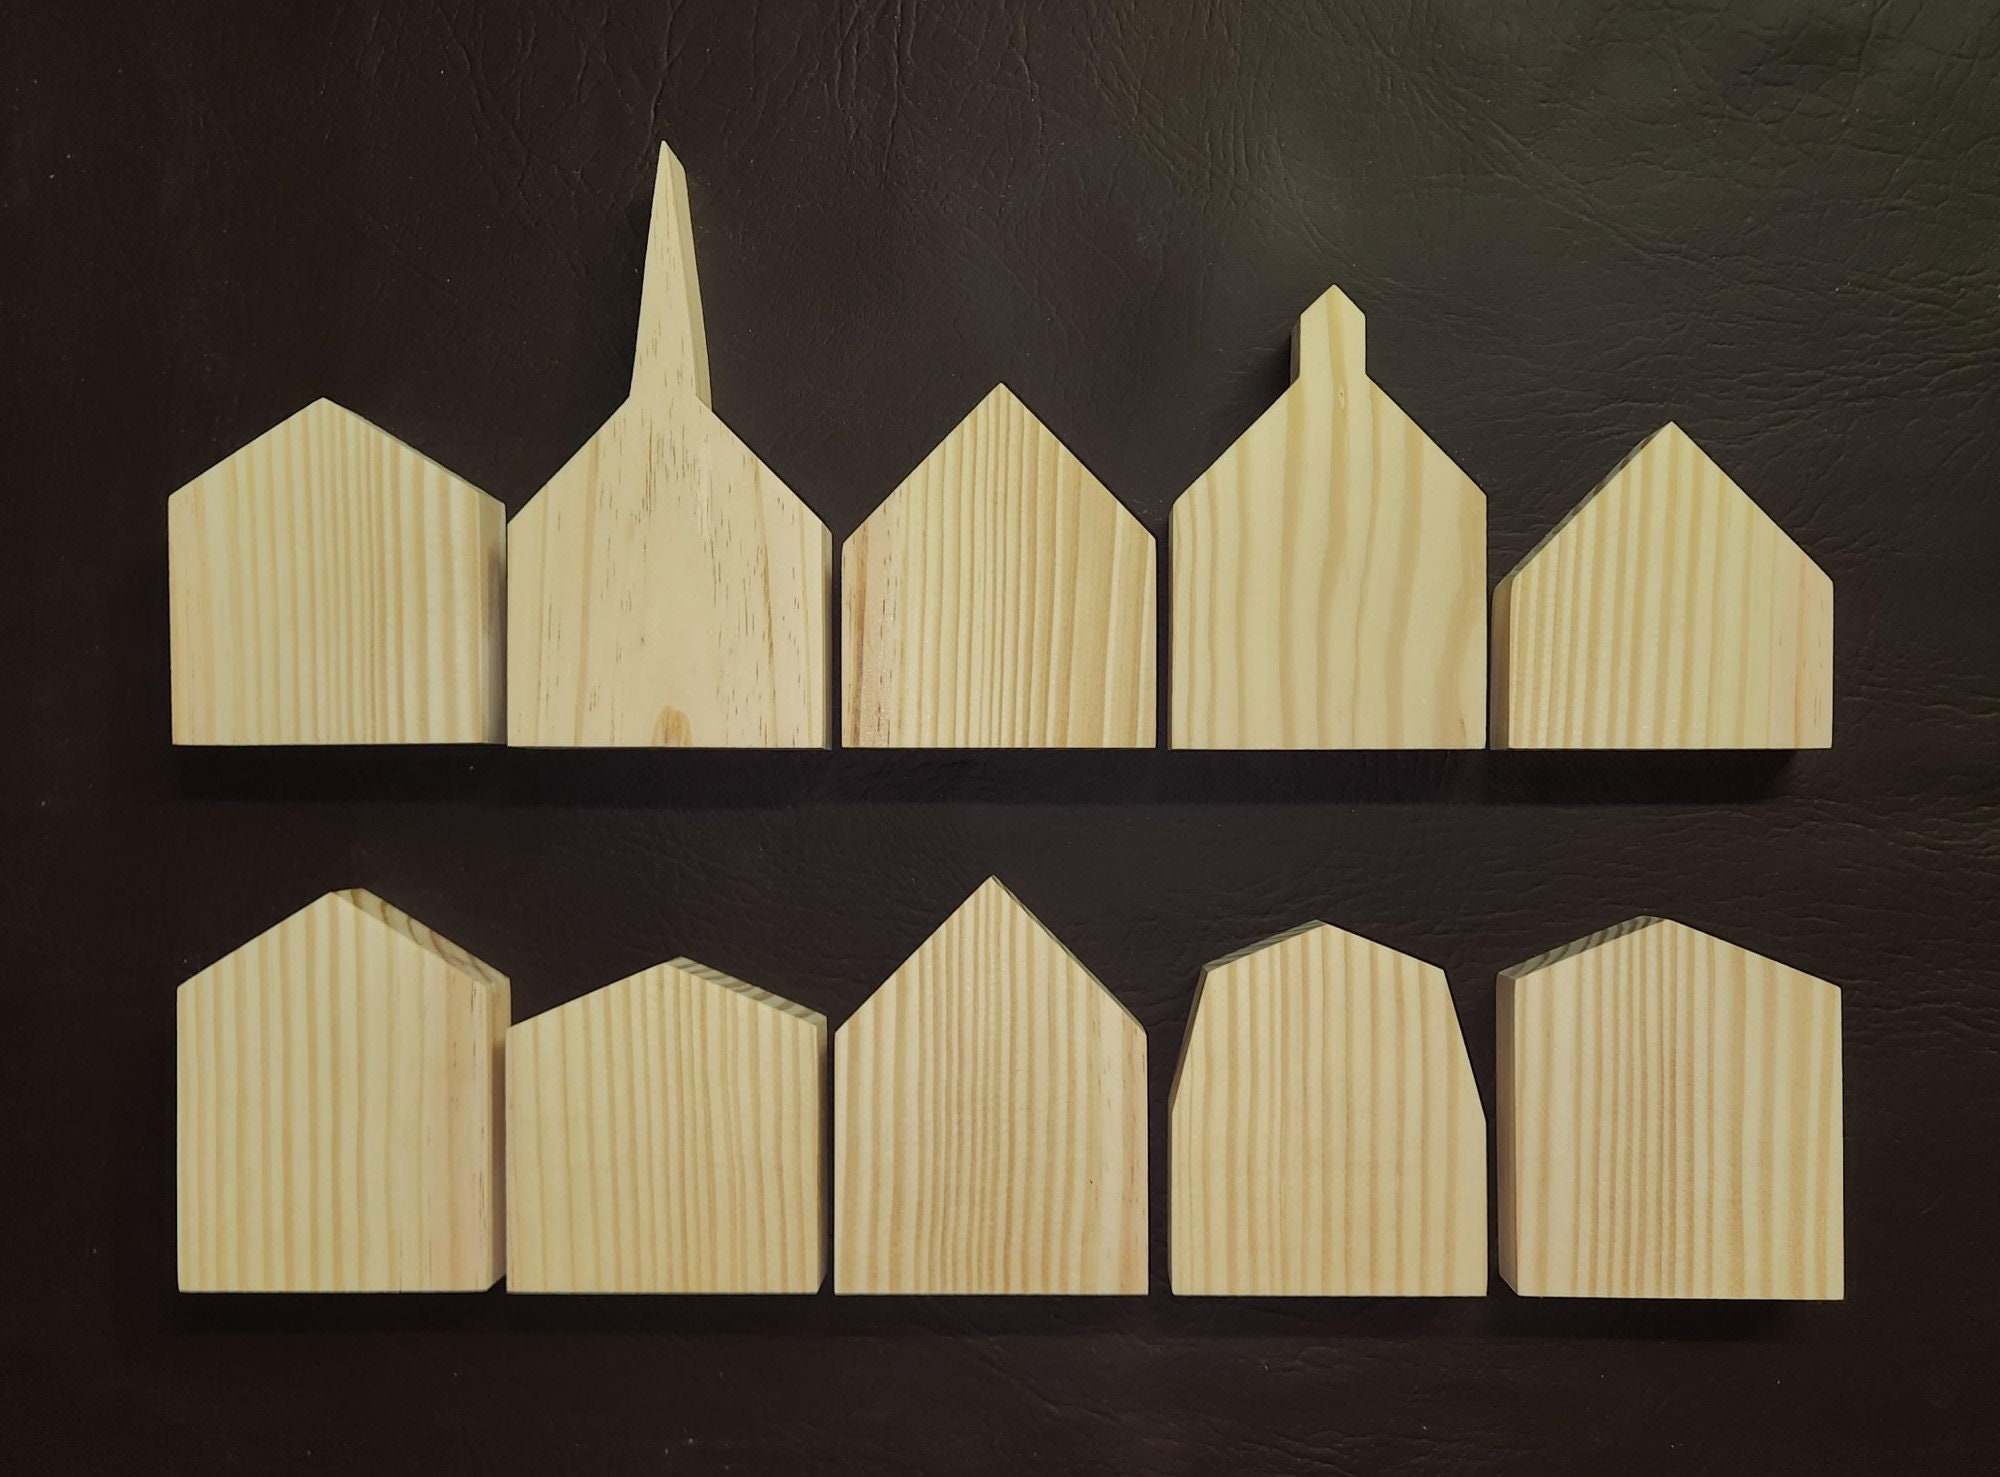 House Laser Cut Unfinished Wood Cutout Shapes Always Check Sizes and  Measure 